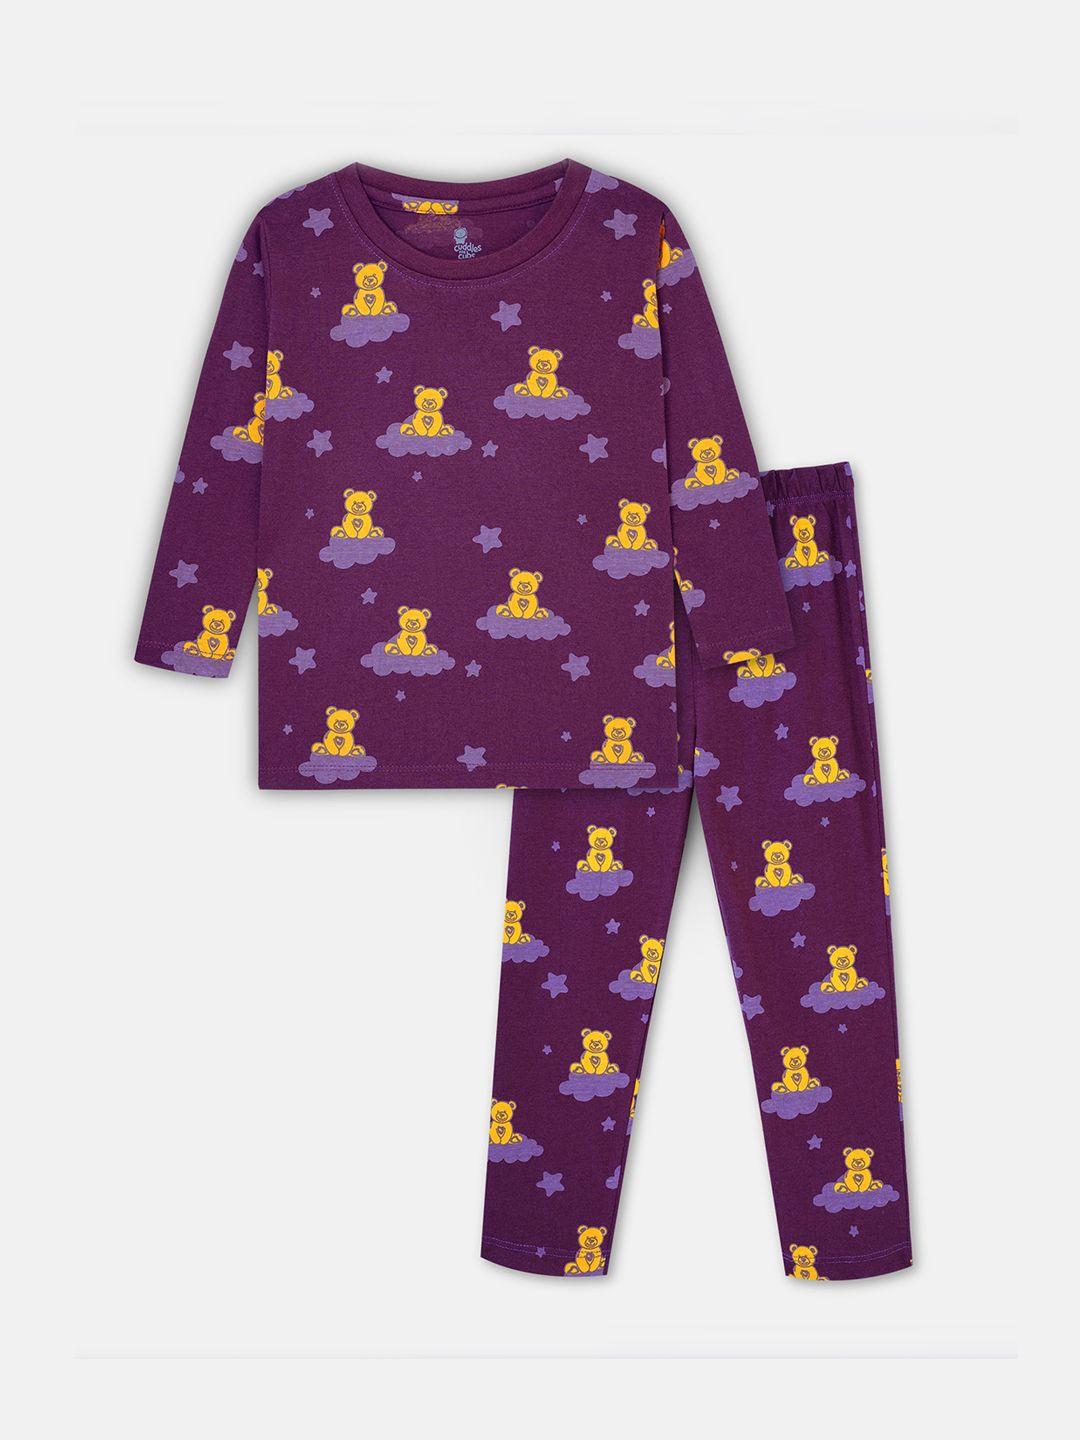 cuddles for cubs unisex kids purple & yellow printed pure cotton night suit